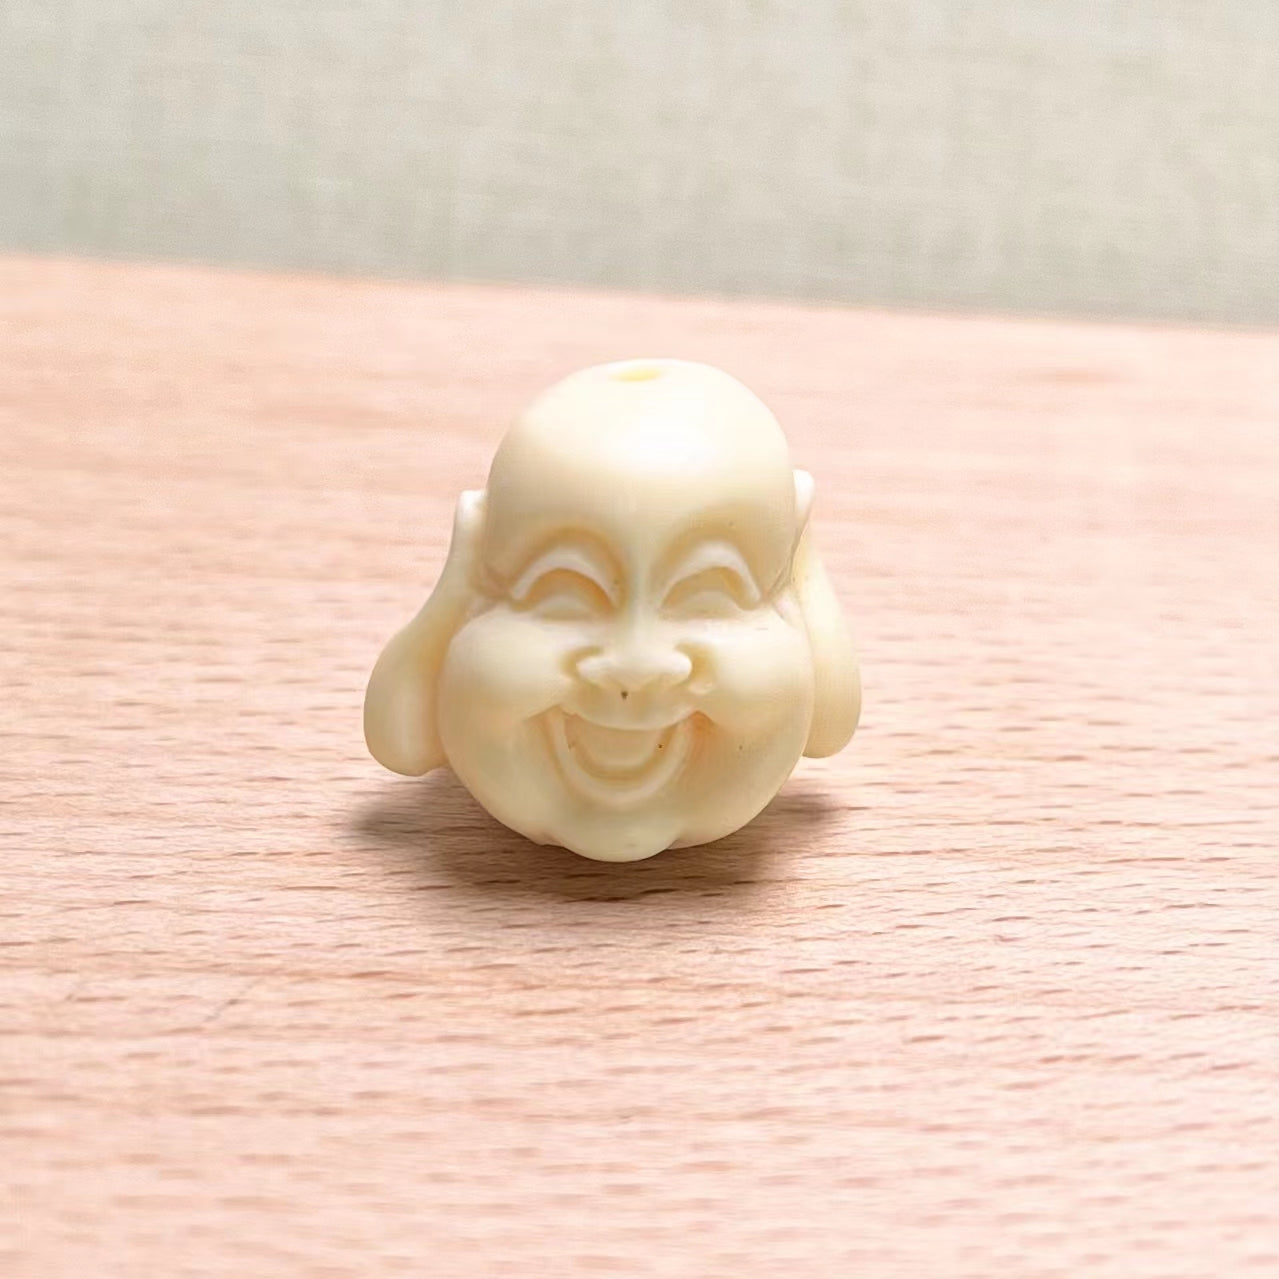 Ivory nut carving charm